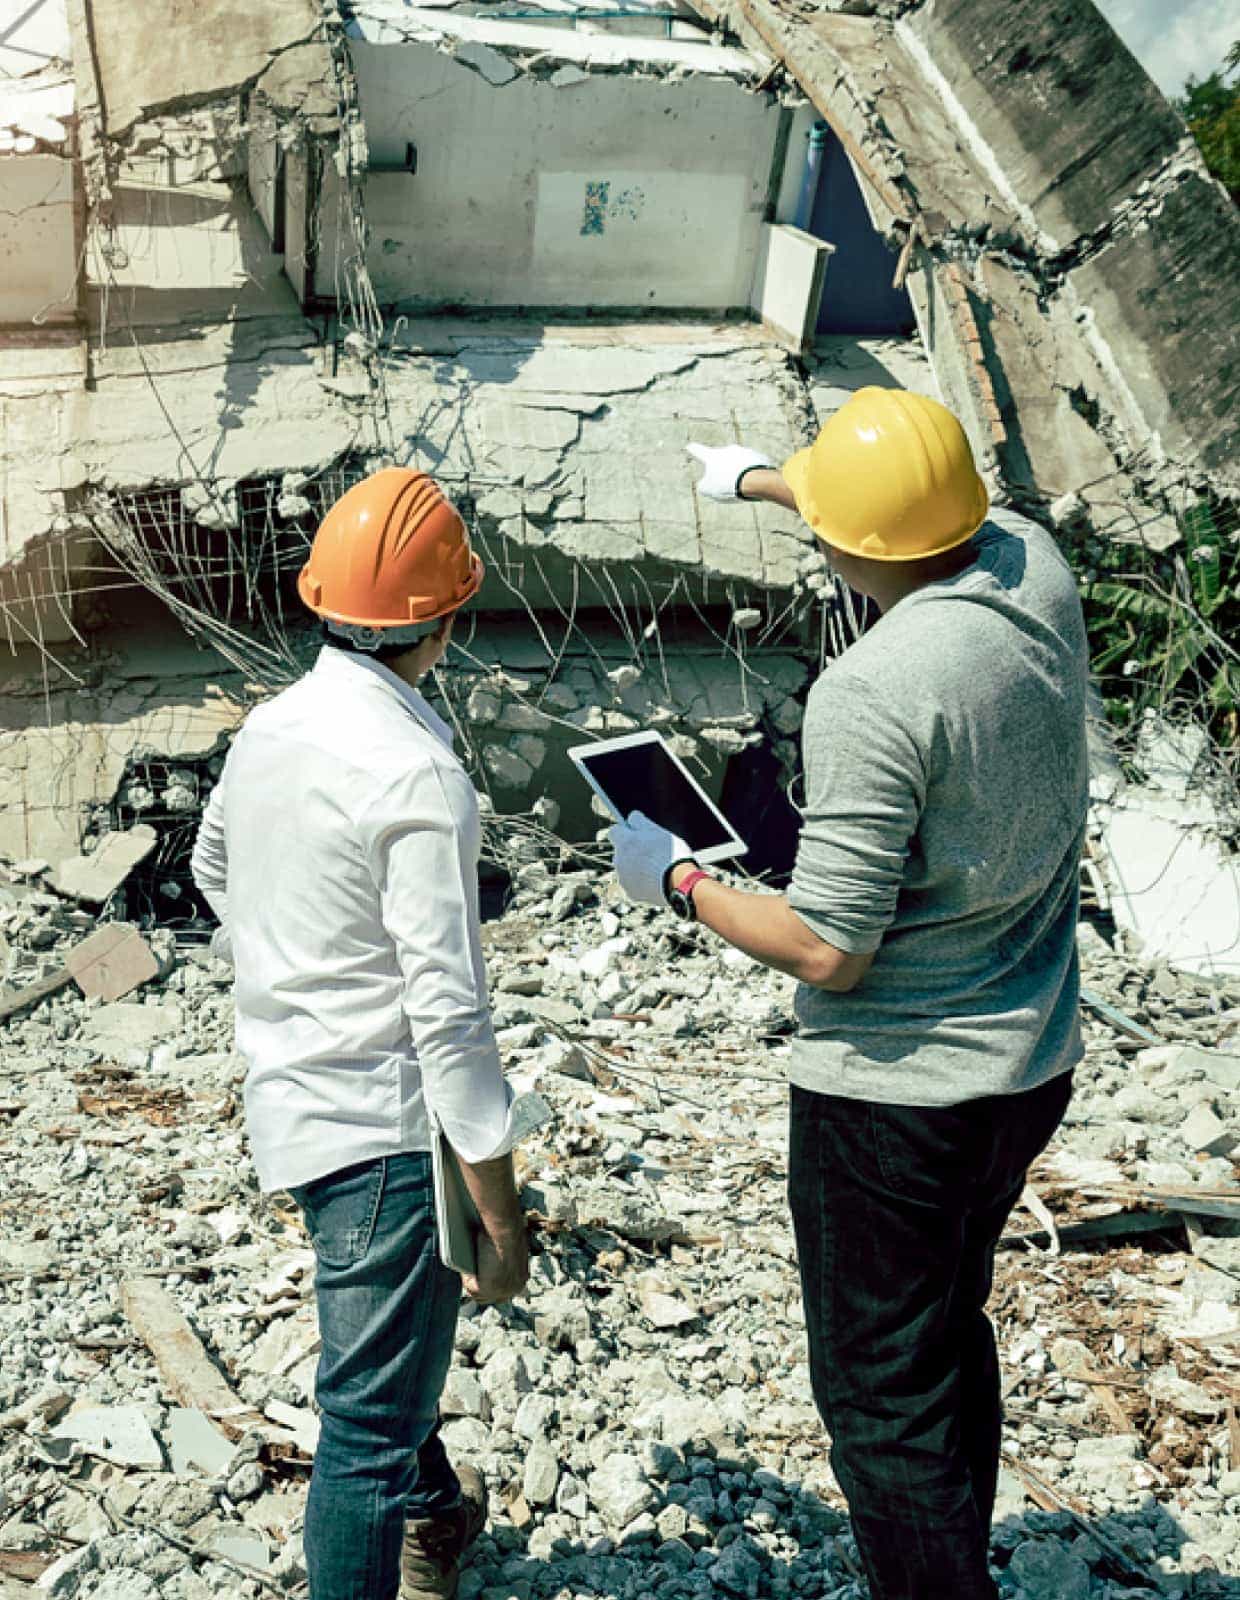 Two people in hard hats look at the rubble of a collapsed building.